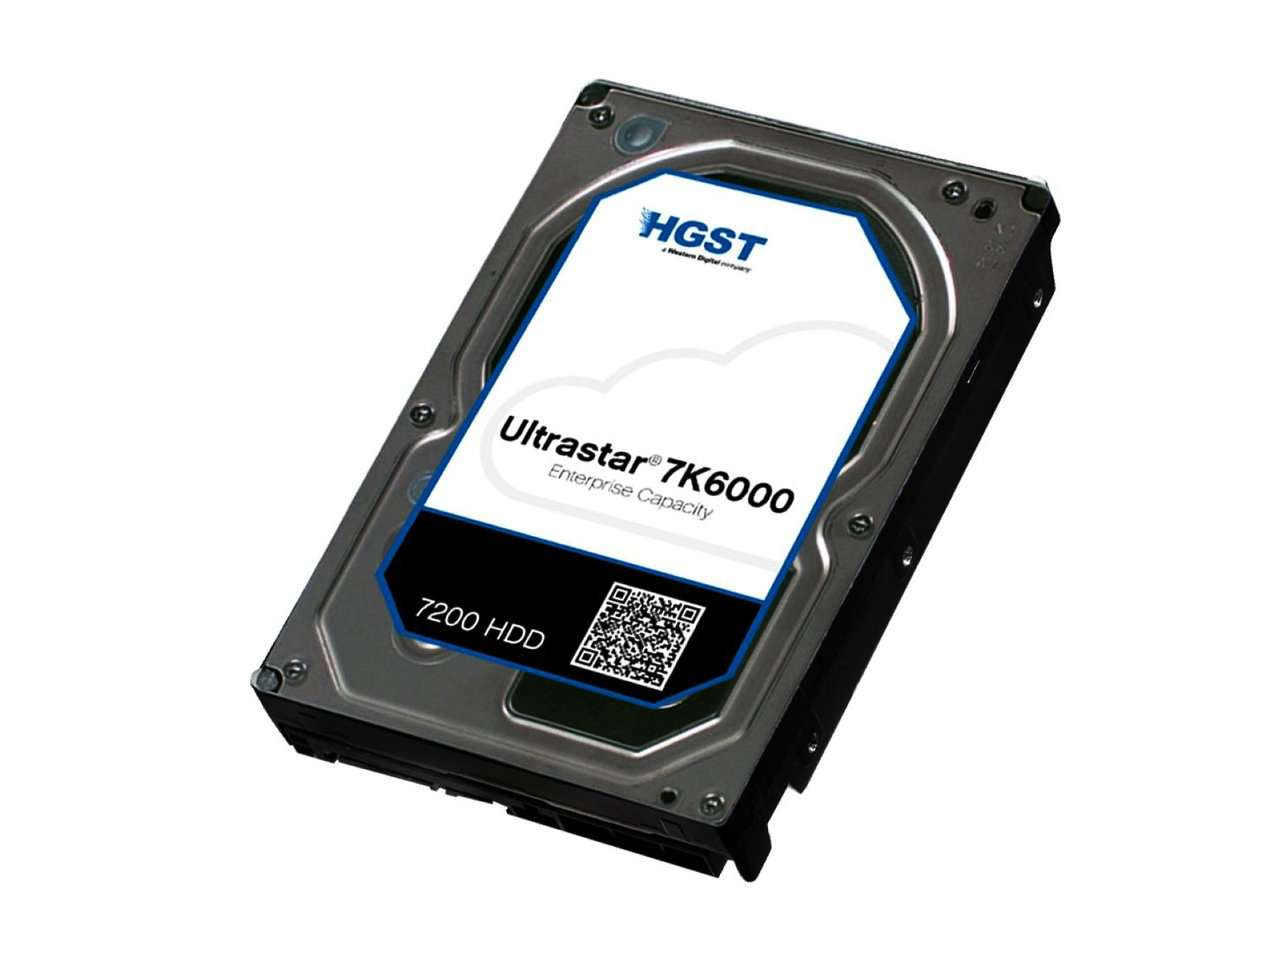 HGST Ultrastar 7K6000 0F22793  HUS726050AL5210 5TB 7.2K RPM SAS 12Gb/s 512e 128MB Cache 3.5" ISE Manufacturer Recertified HDD